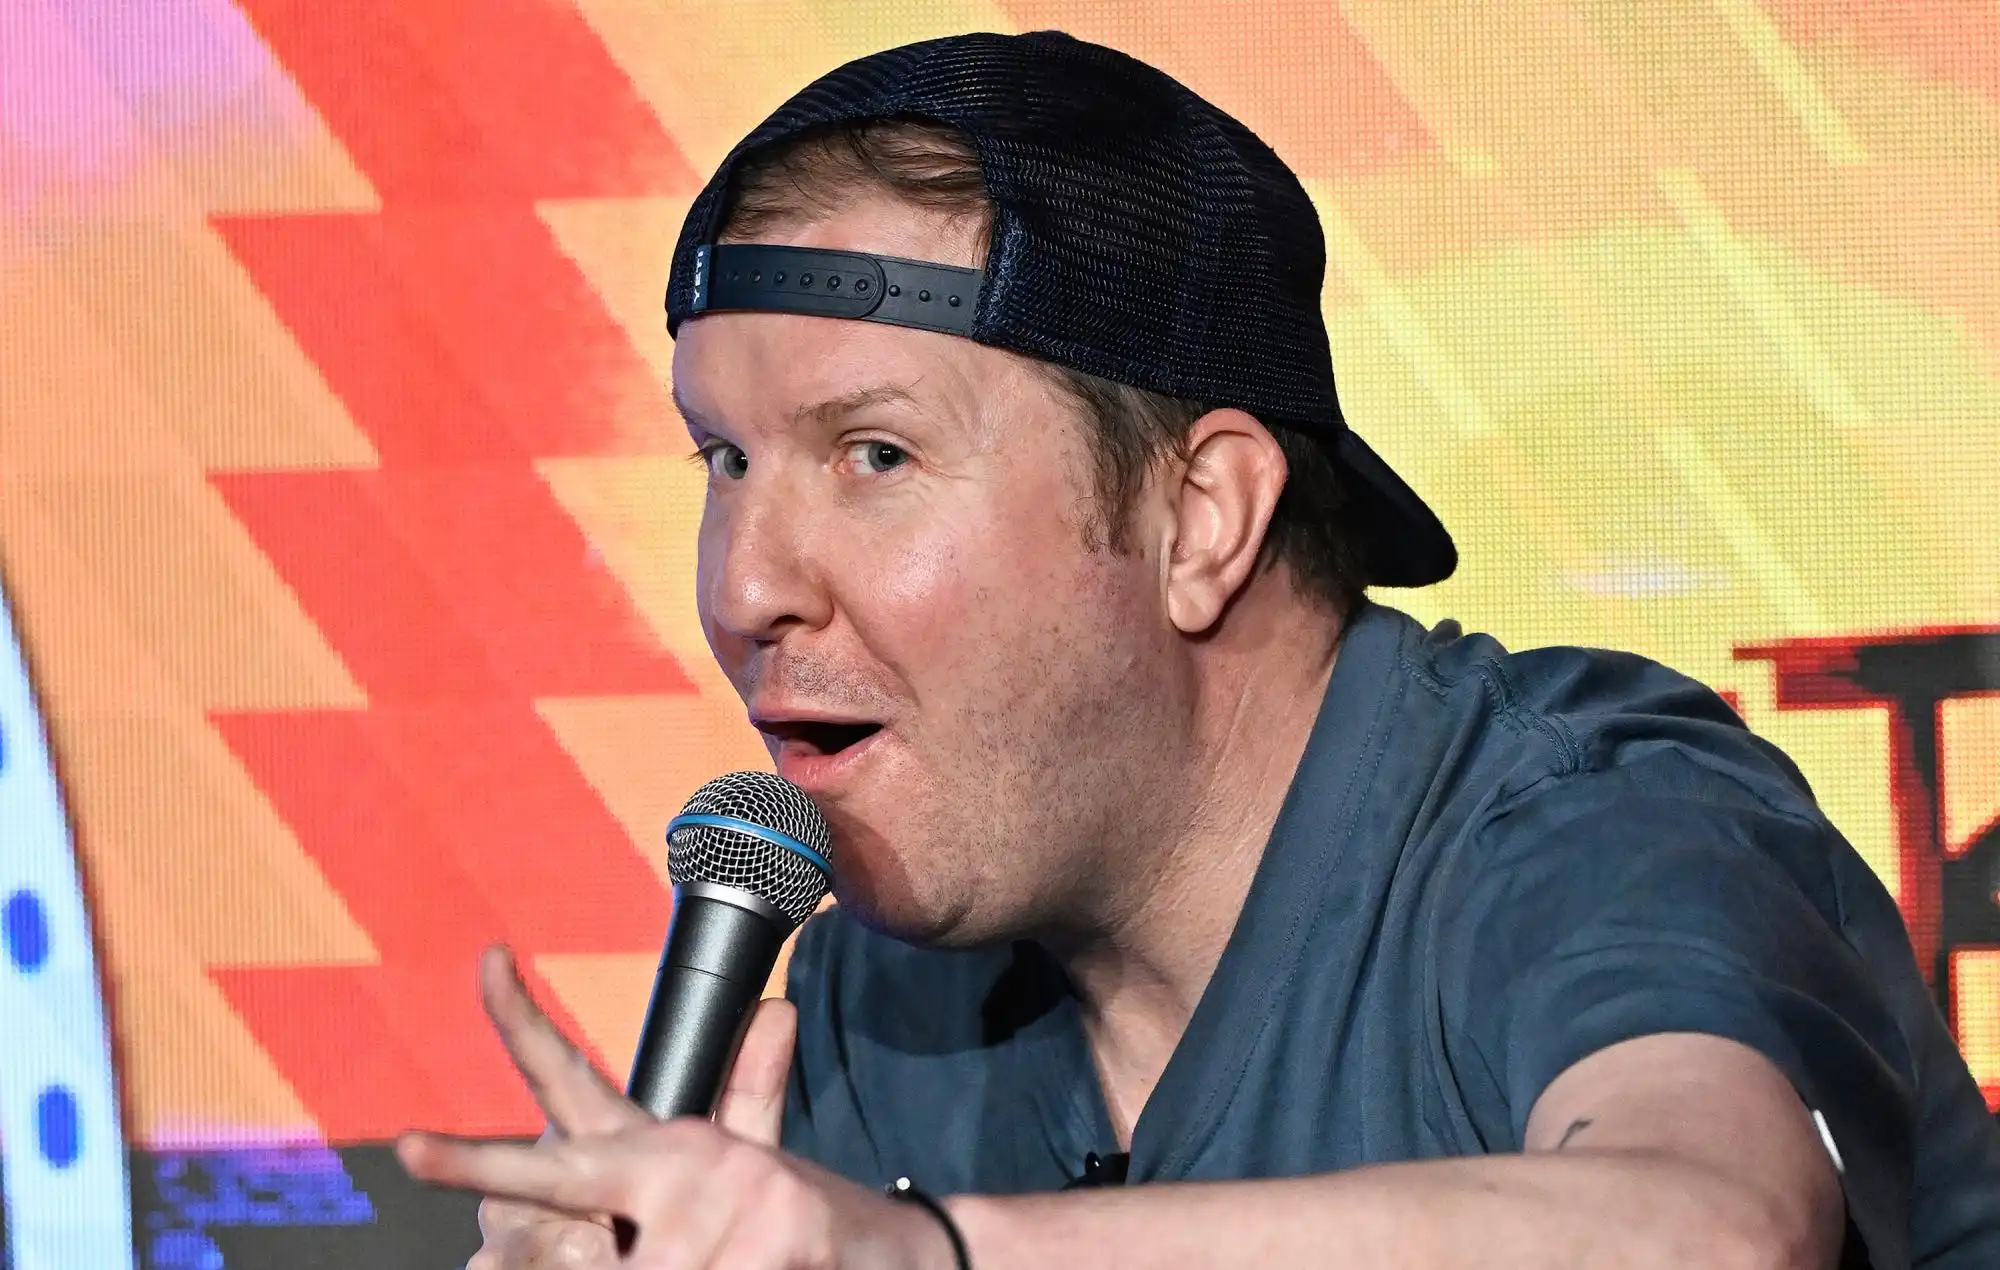 Comedian Nick Swardson booed off stage for appearing drunk